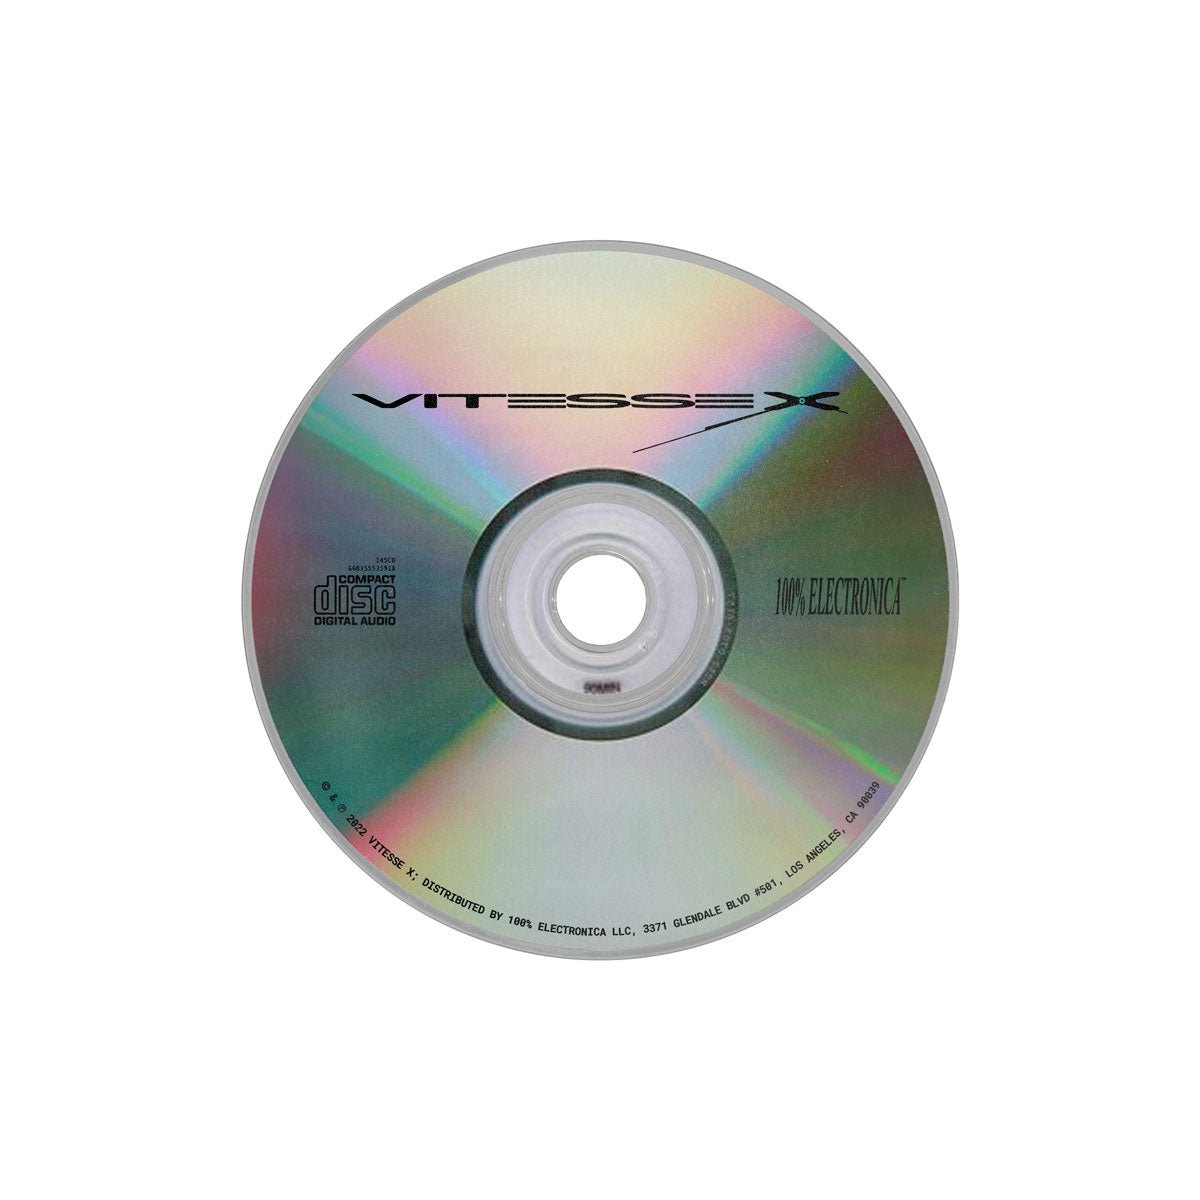 Vitesse X - Us Ephemeral CD - 100% Electronica Official Store (Photo 2)